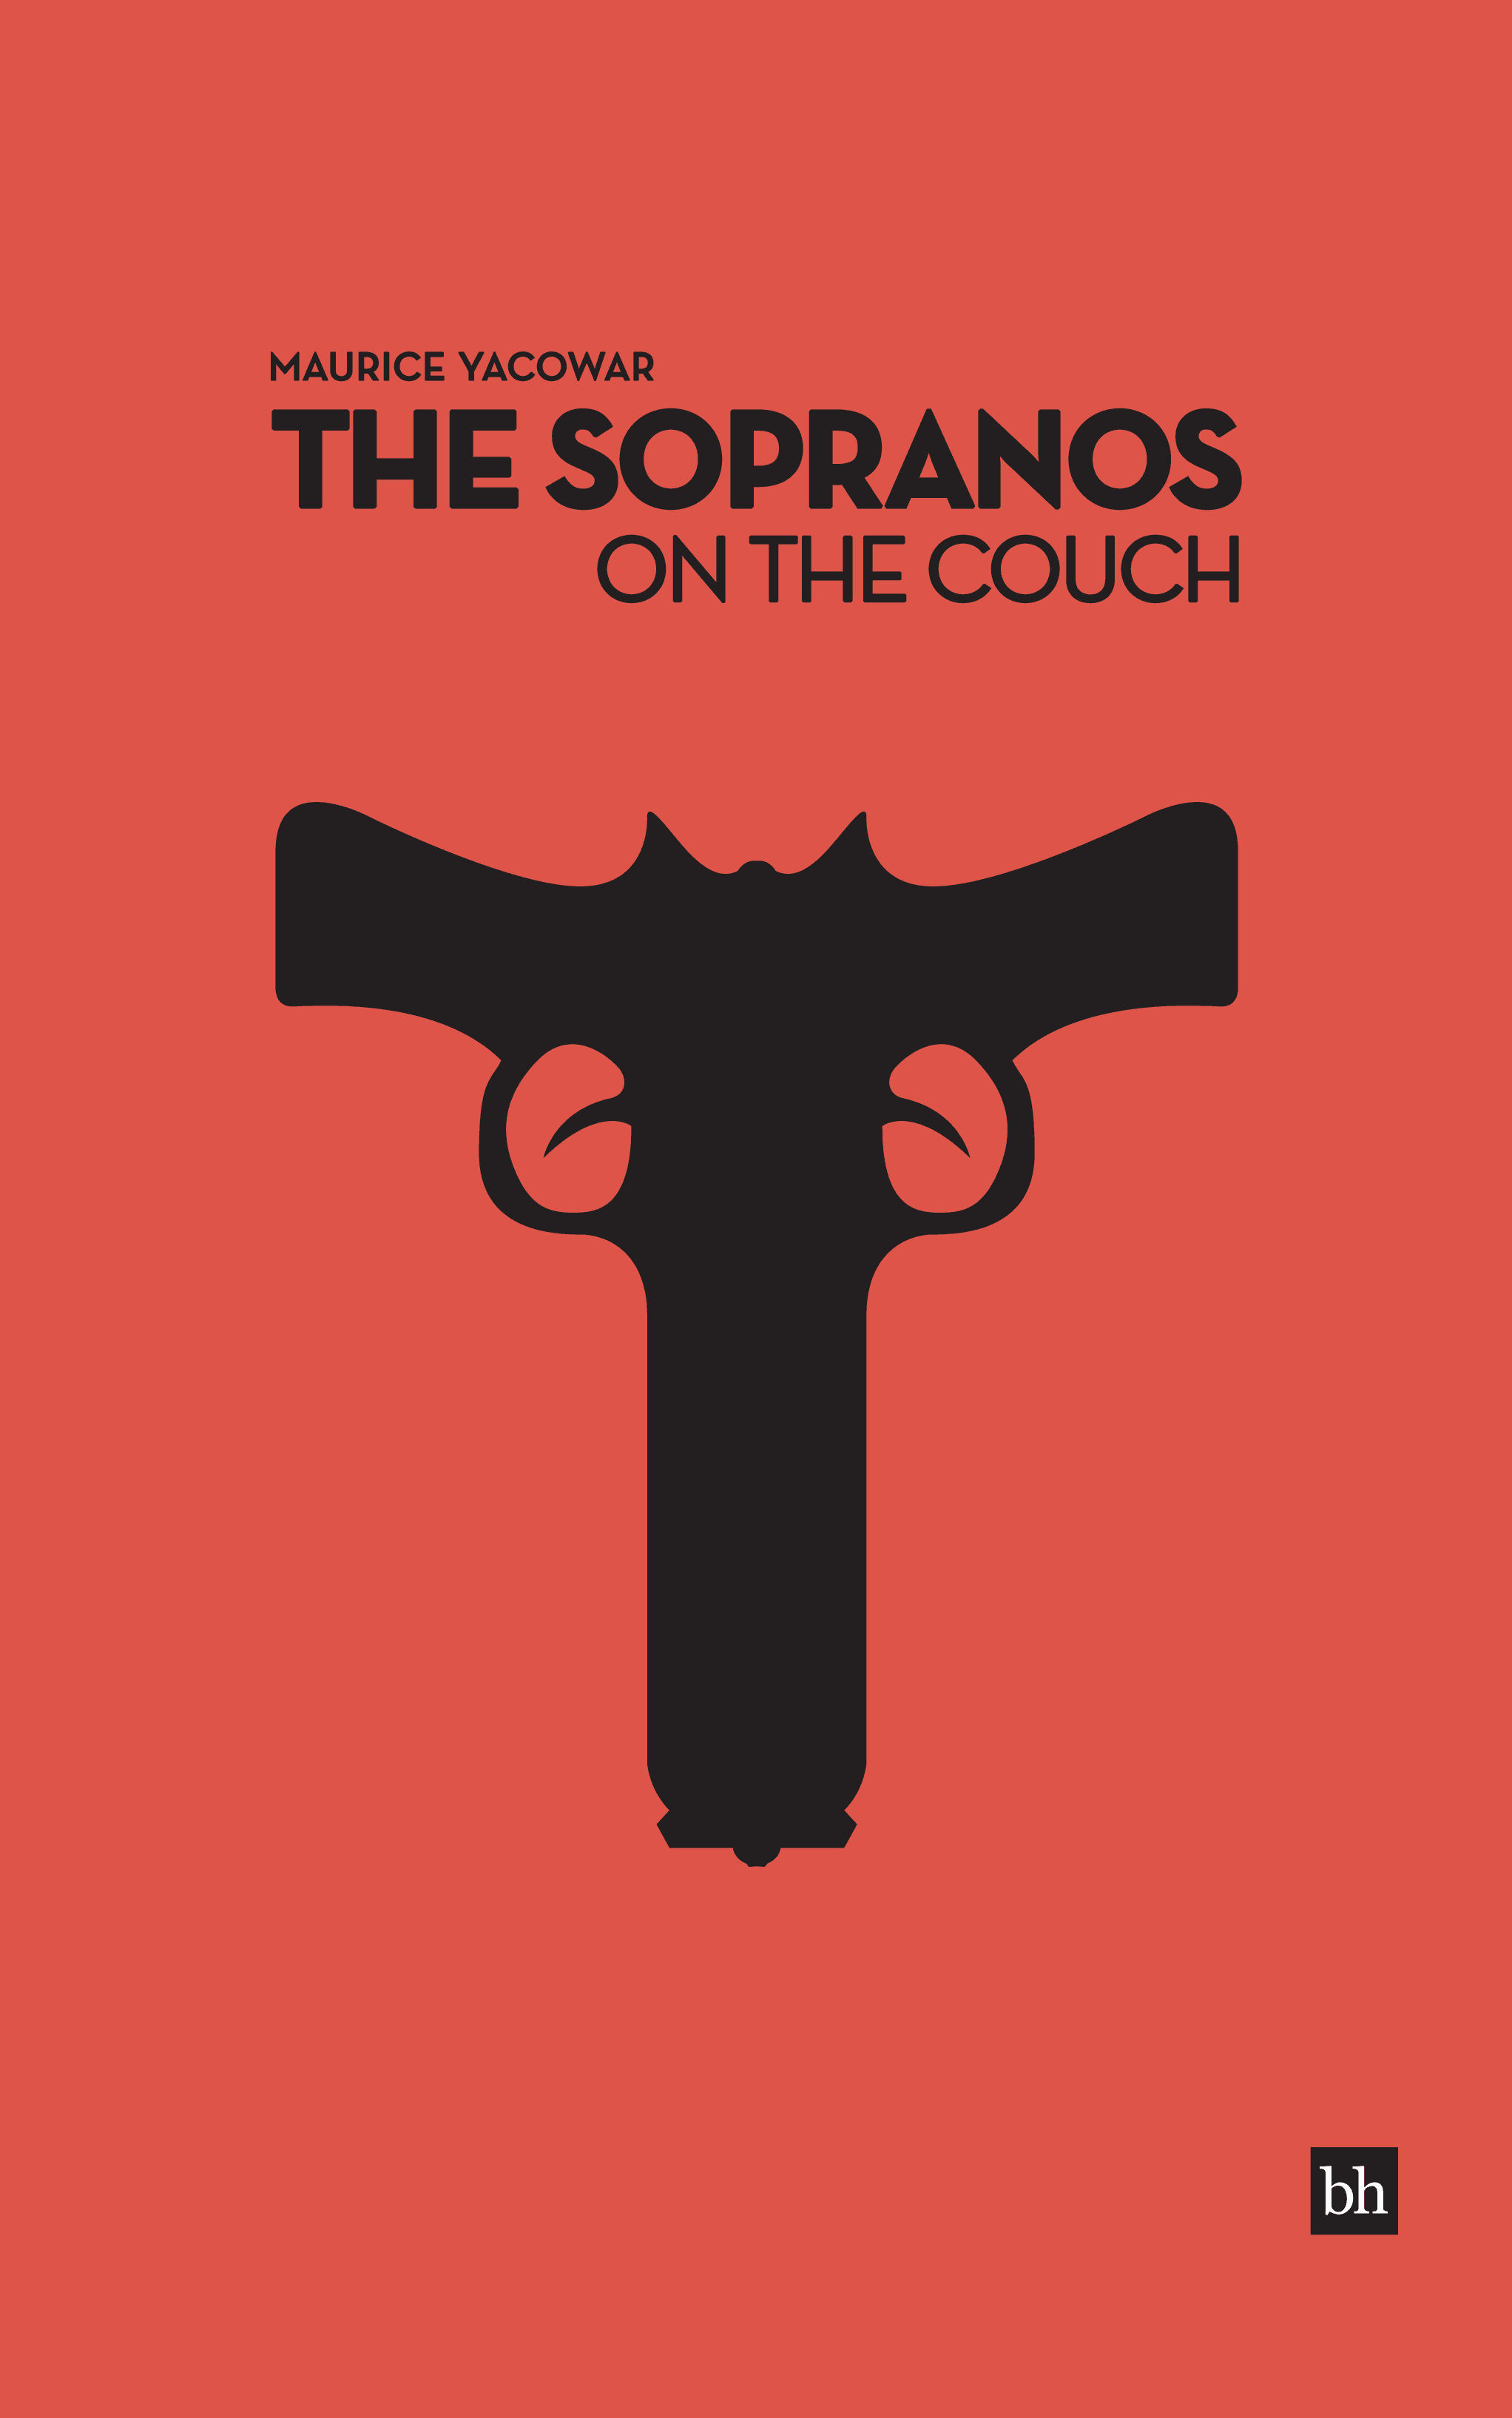 The Sopranos On The Couch by Maurice Yacowar